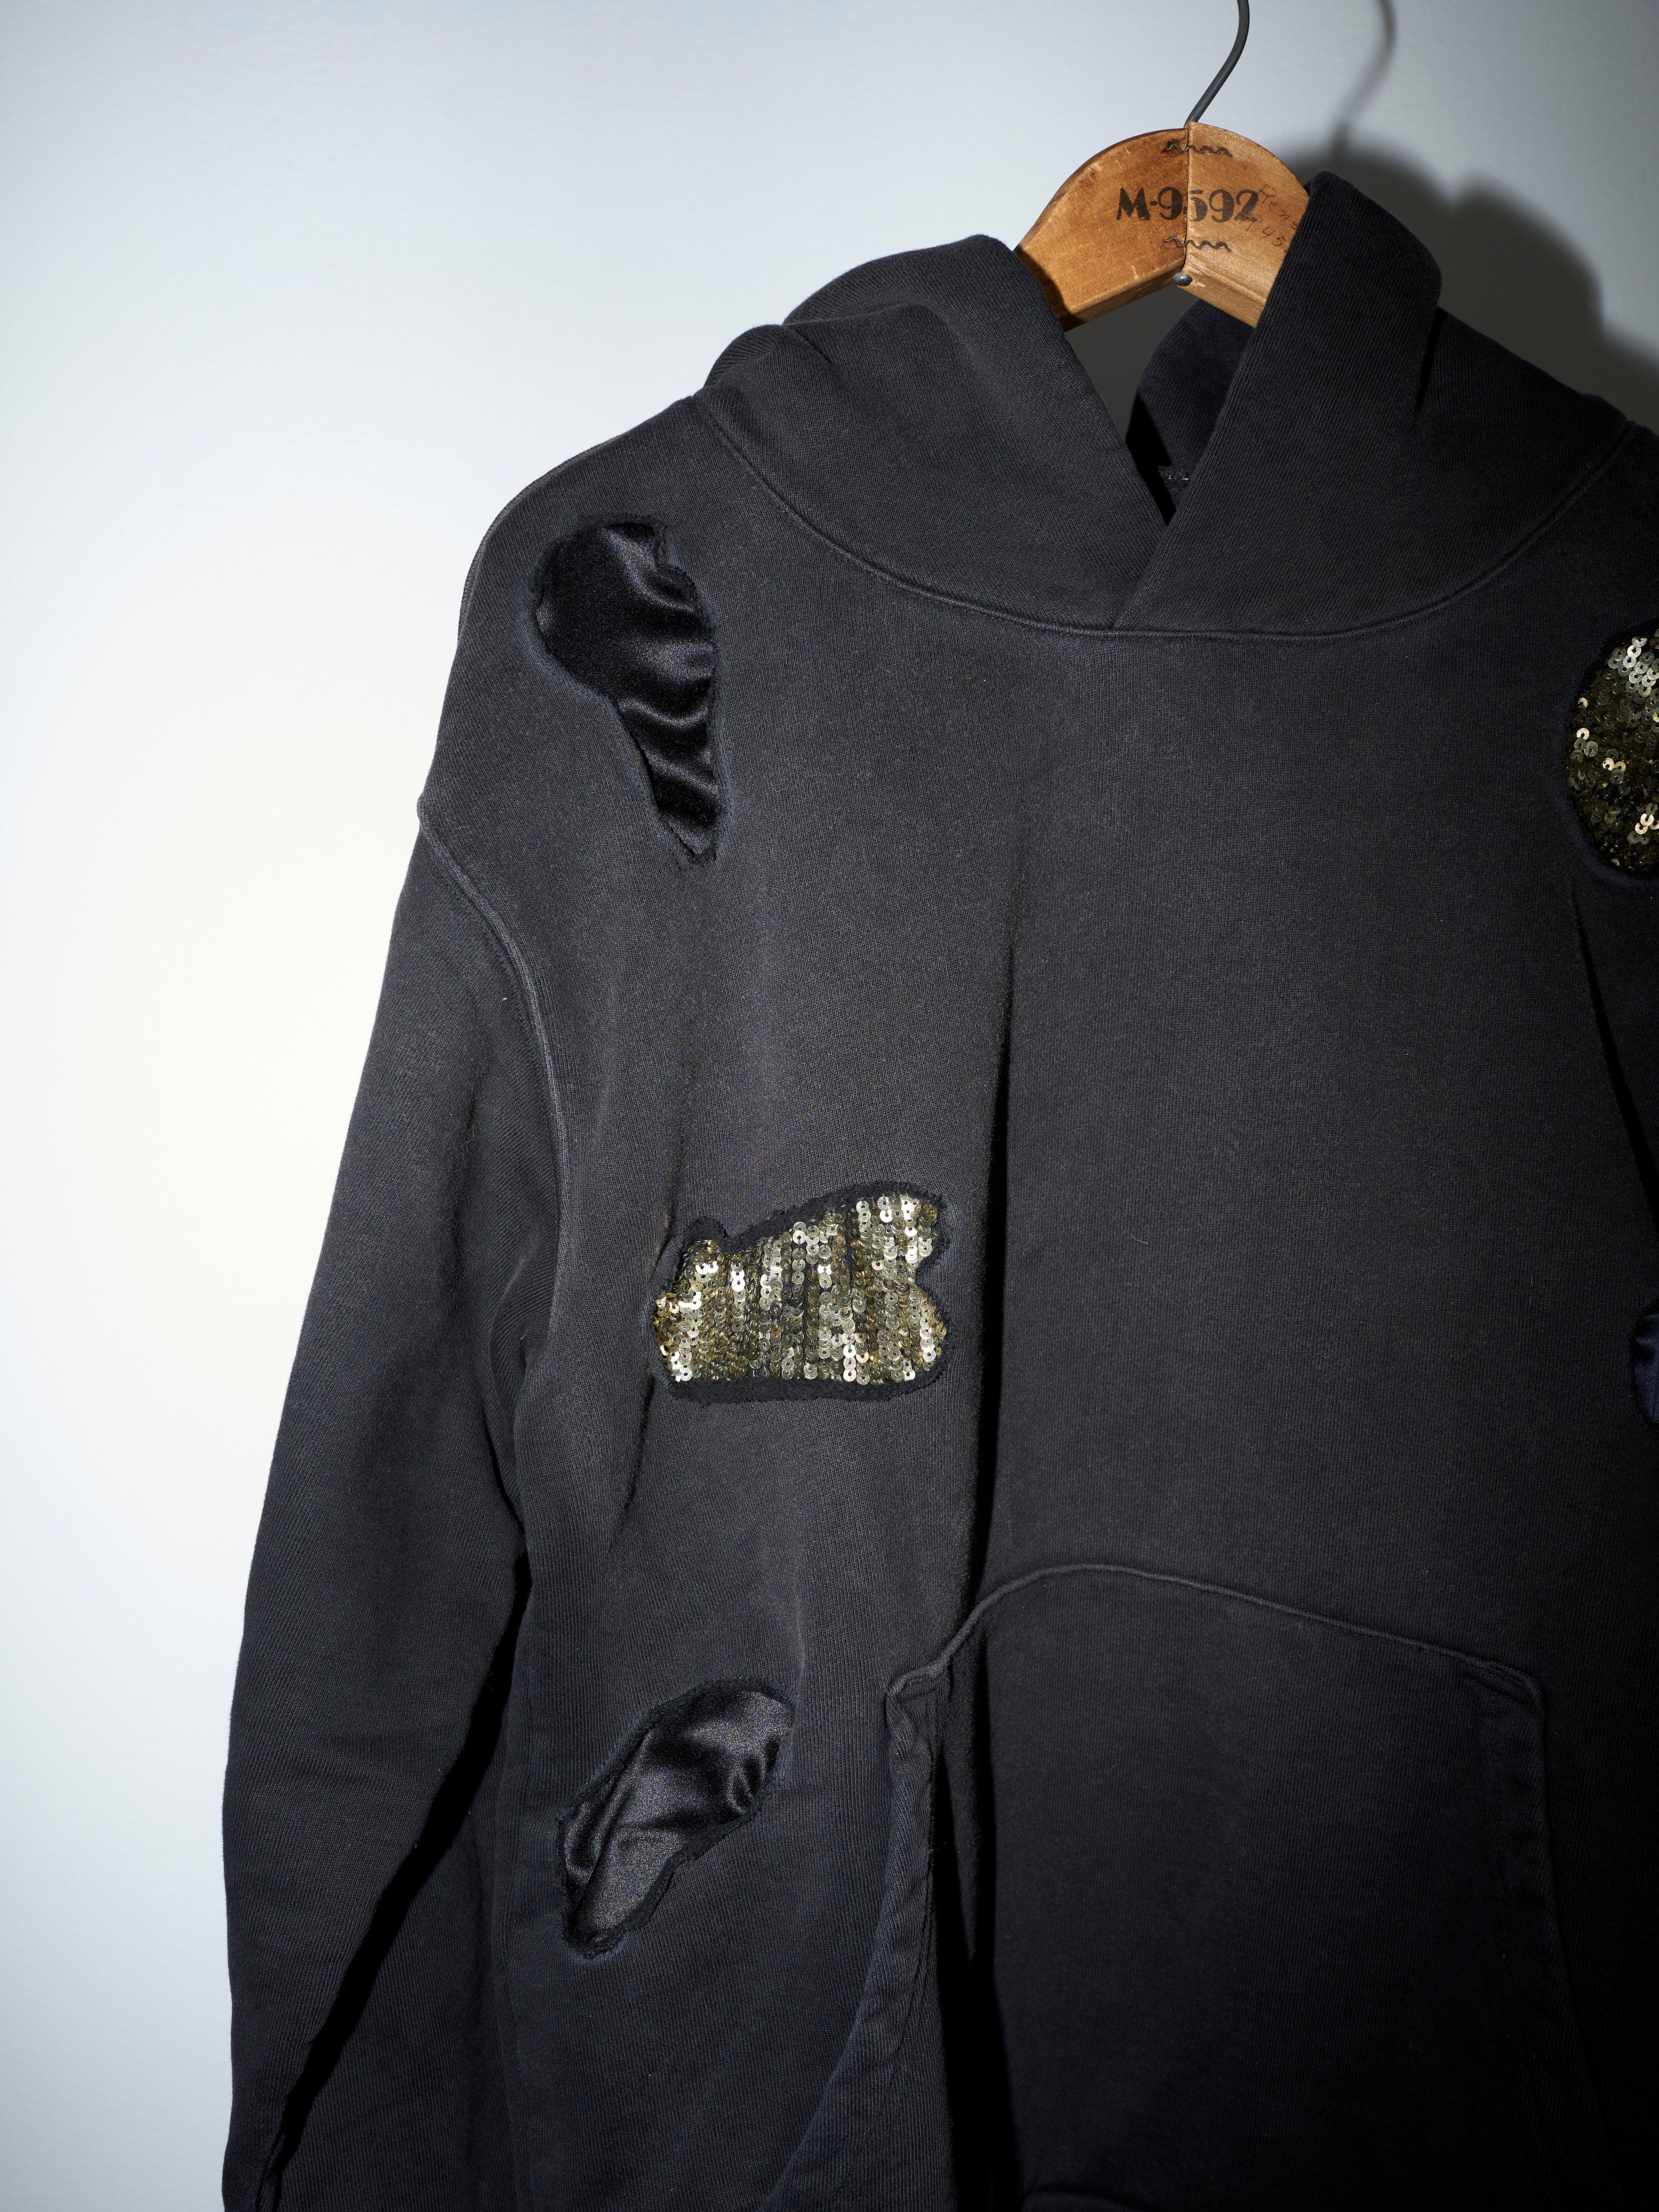 Brand: J Dauphin
Embellished  Patch Work Hoodie Organic Cotton Black Blue Gold Sequin Silk


SPRING SUMMER 2022

Available in Size Small / Medium / Large


The tees express a hybrid of easy-luxe and bourgeoisie jet-set look. Effortless and